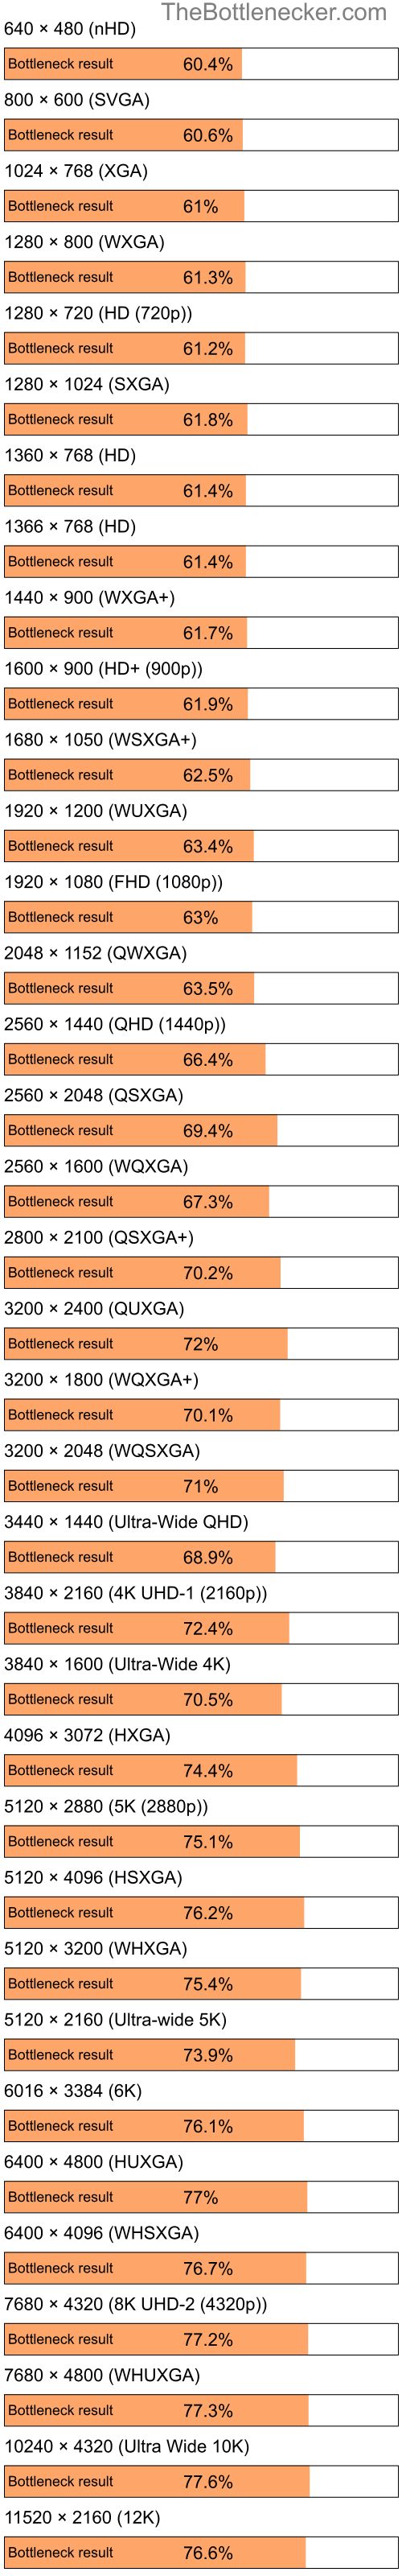 Bottleneck results by resolution for Intel Pentium 4 and NVIDIA GeForce 9100M G in Processor Intense Tasks